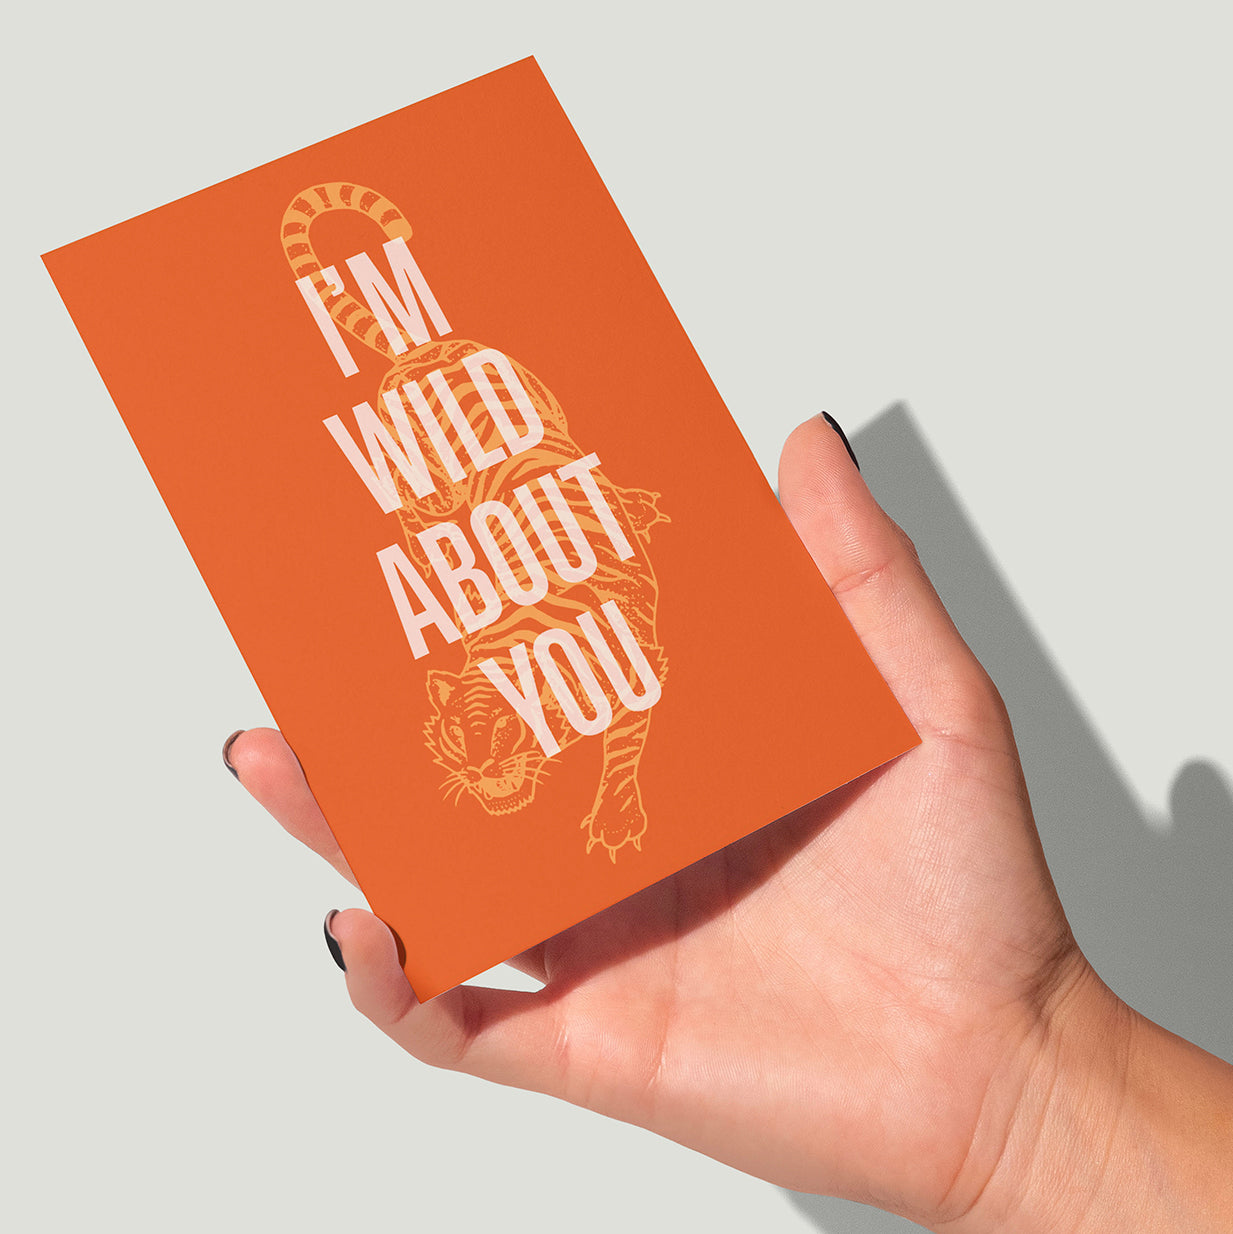 I'm Wild About You | Love Card | Anniversary | Engagement | Valentine's